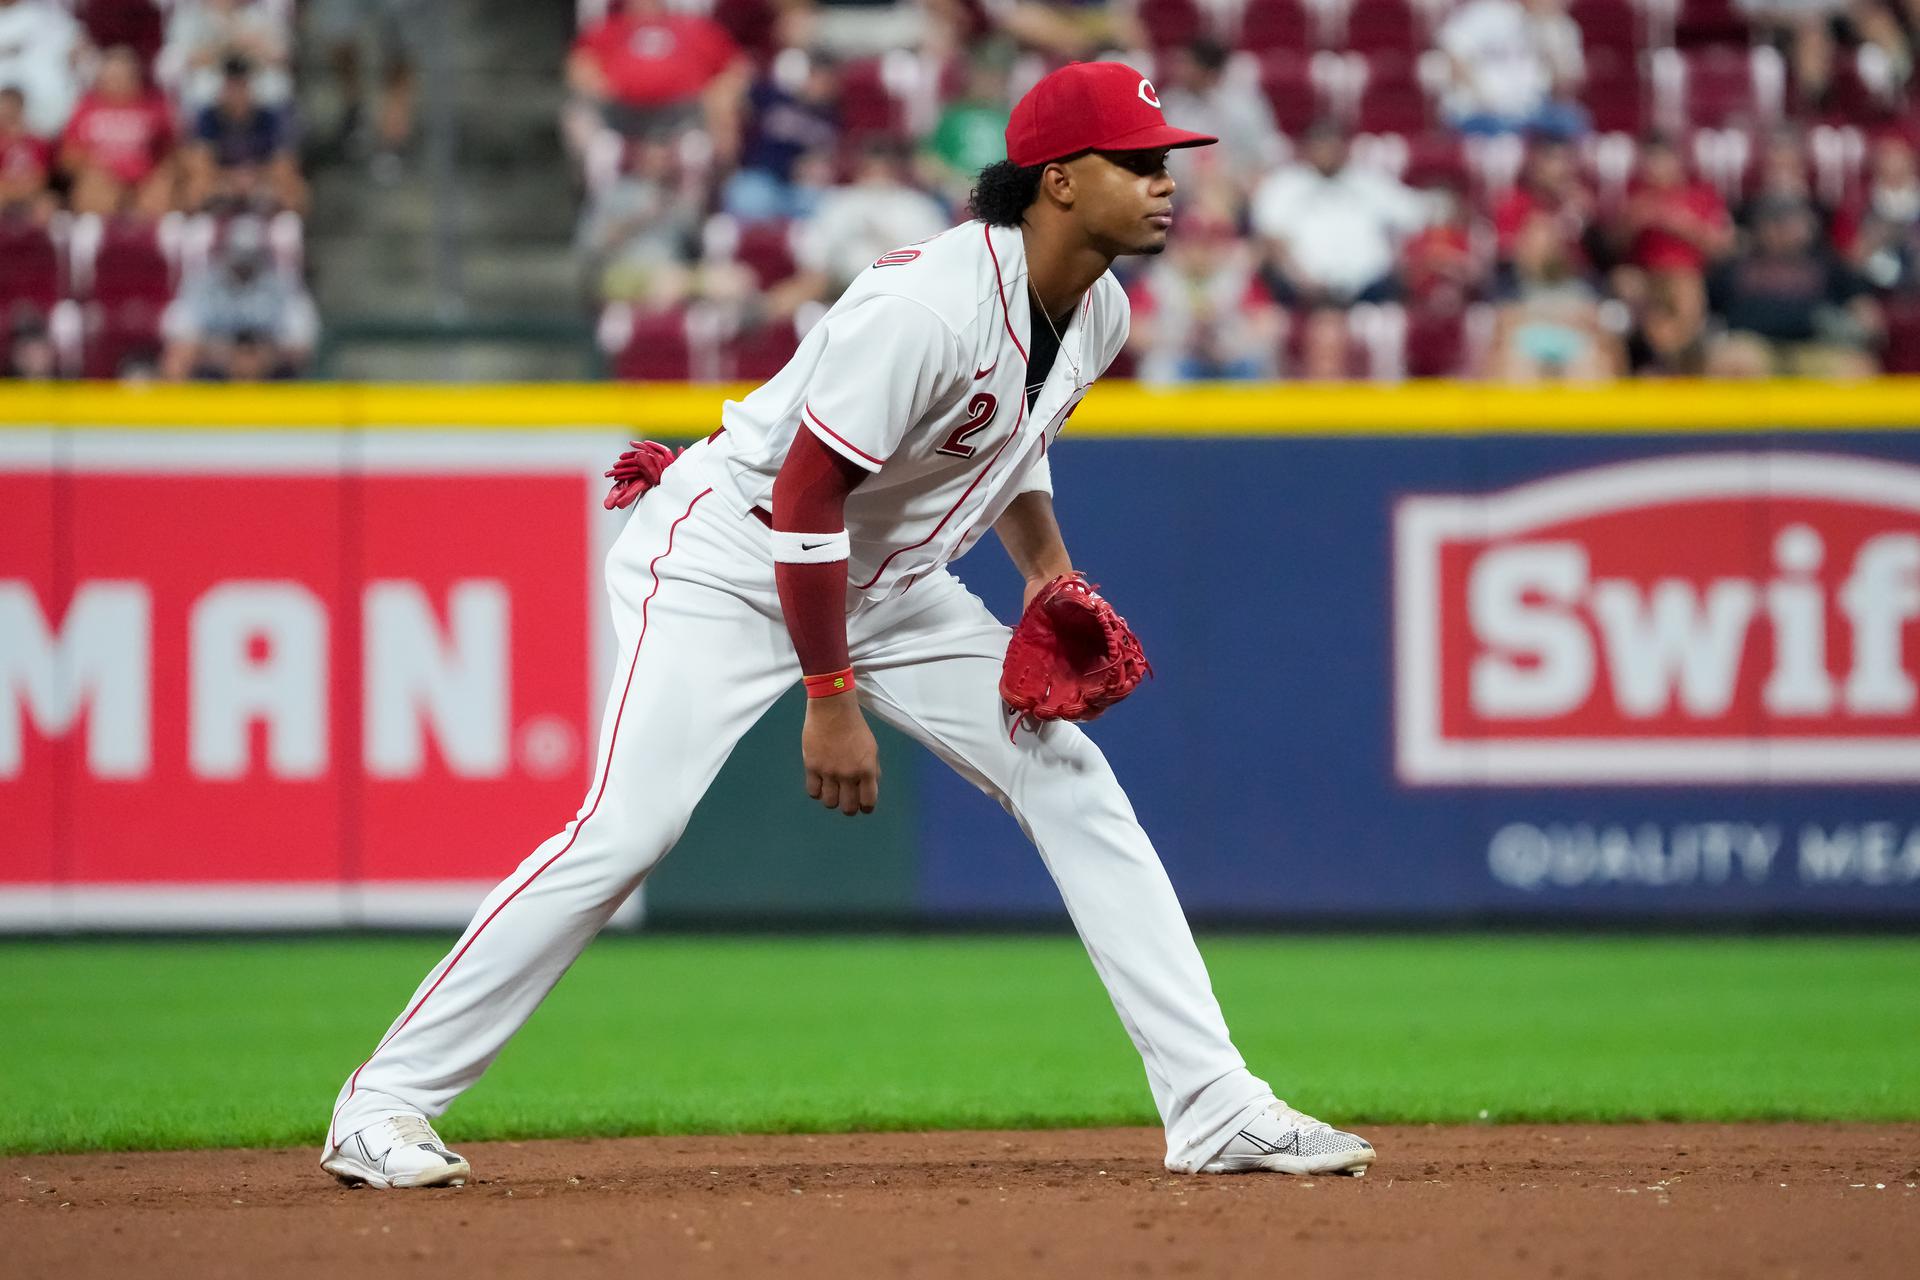 Reds player Jose Barrero stands ready while playing shortstop during a baseball game